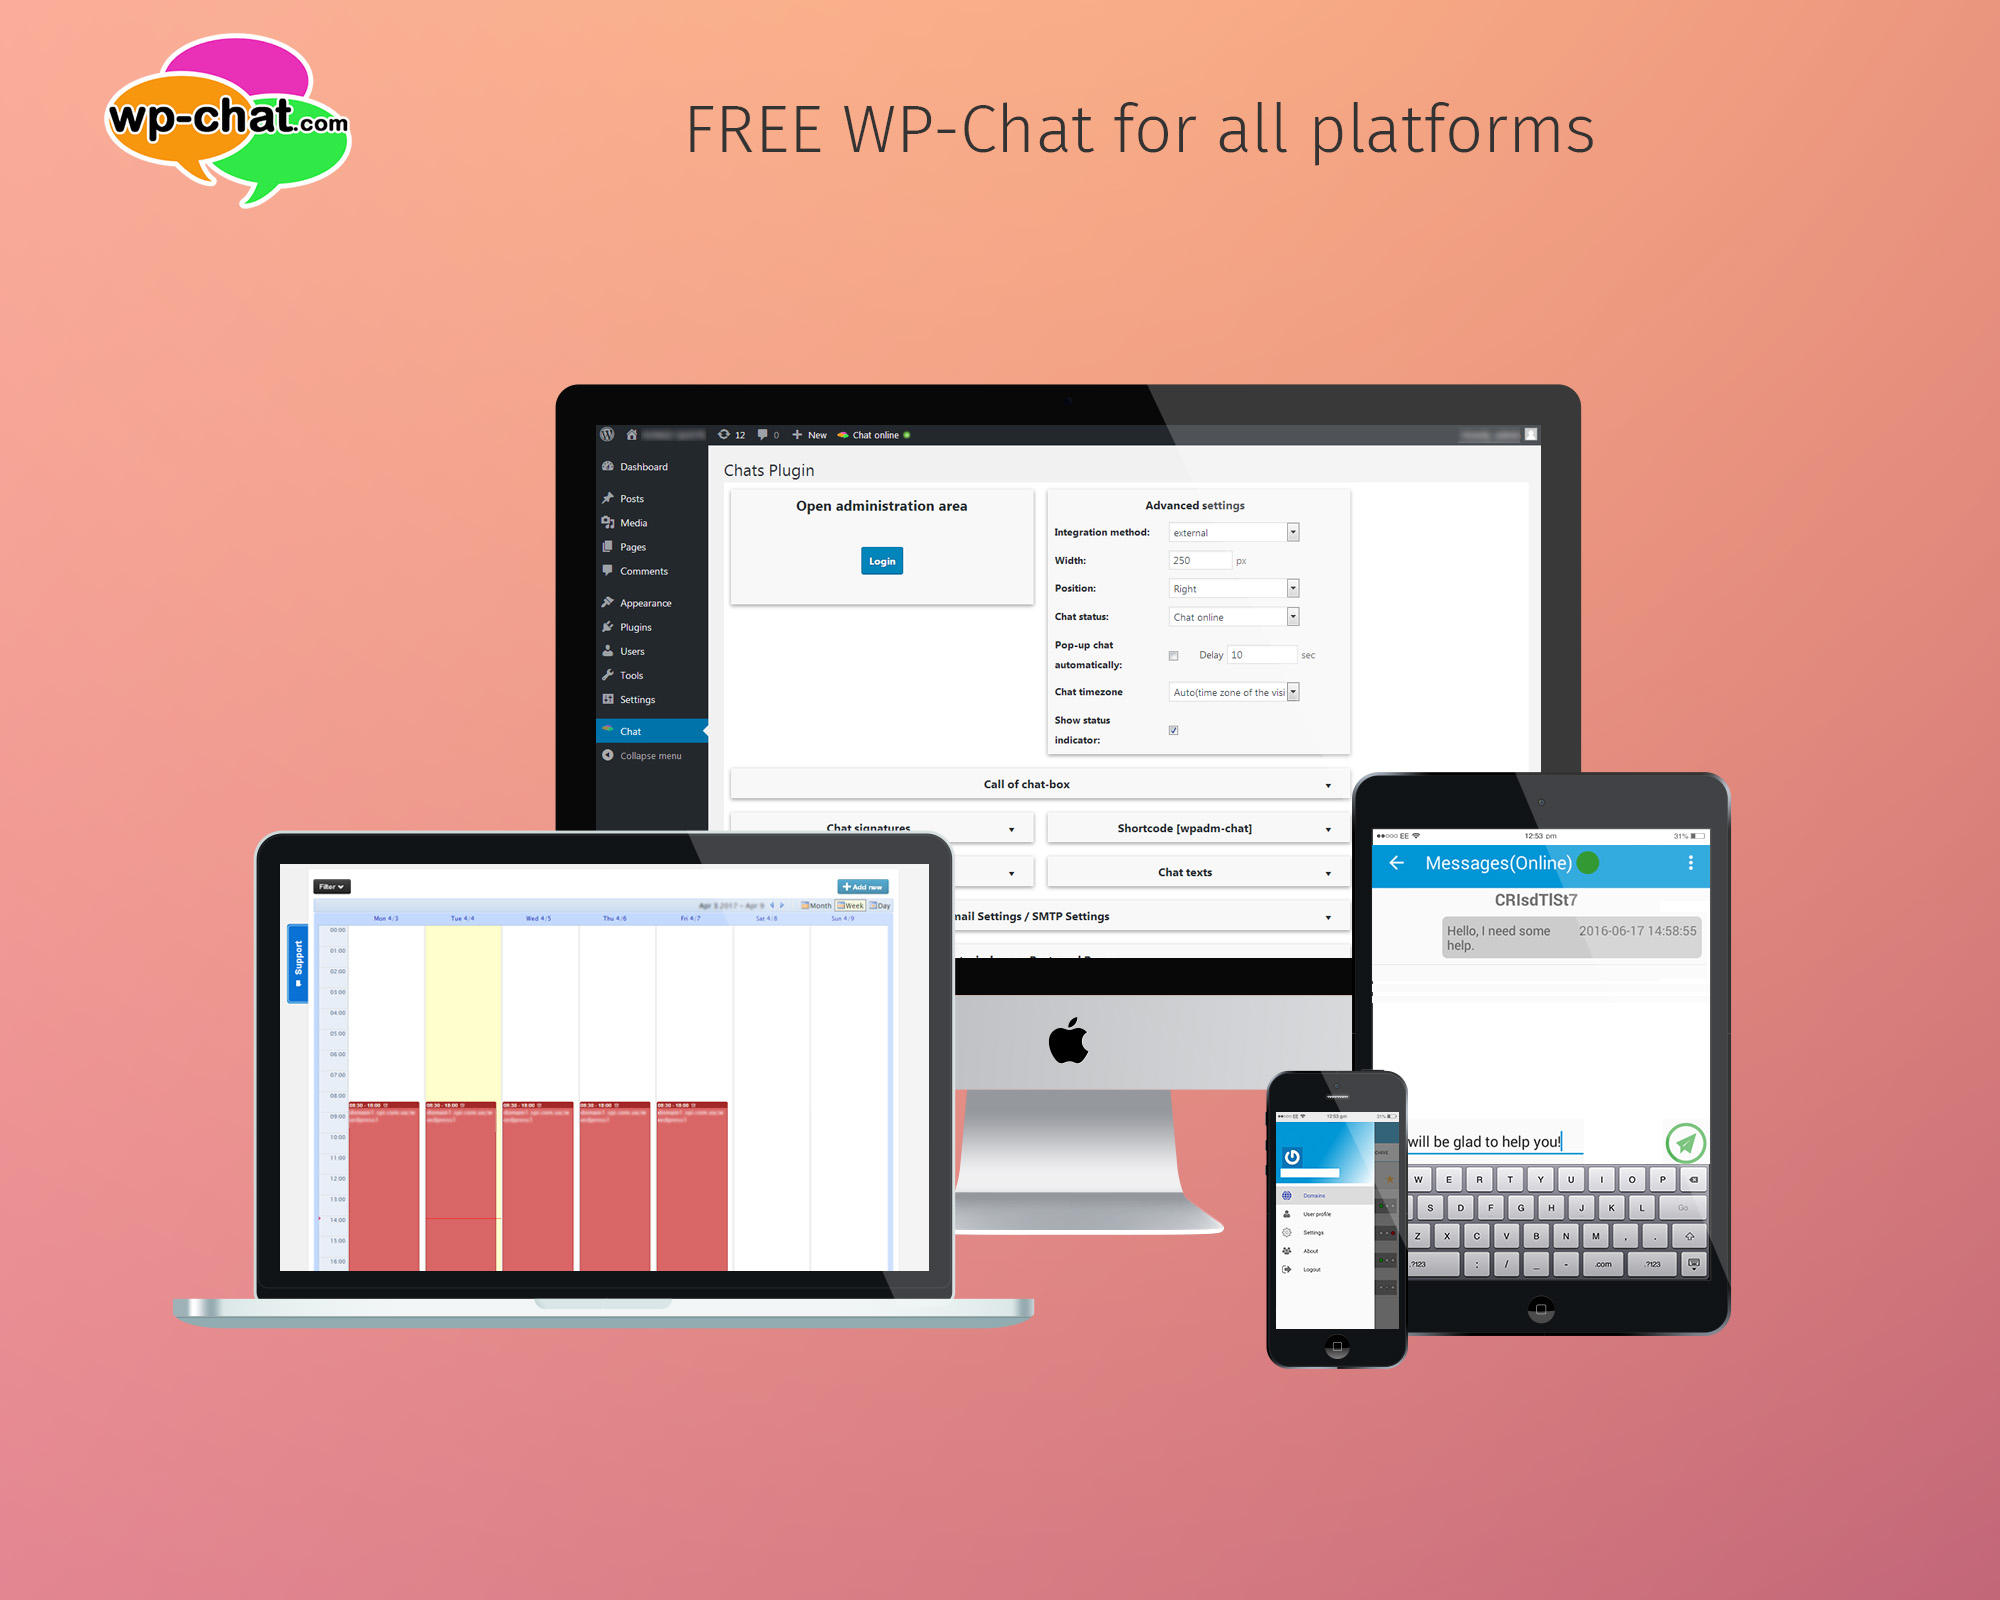 For all platforms: webchat, that works on mobile iPhone, Android or BlackBarry.